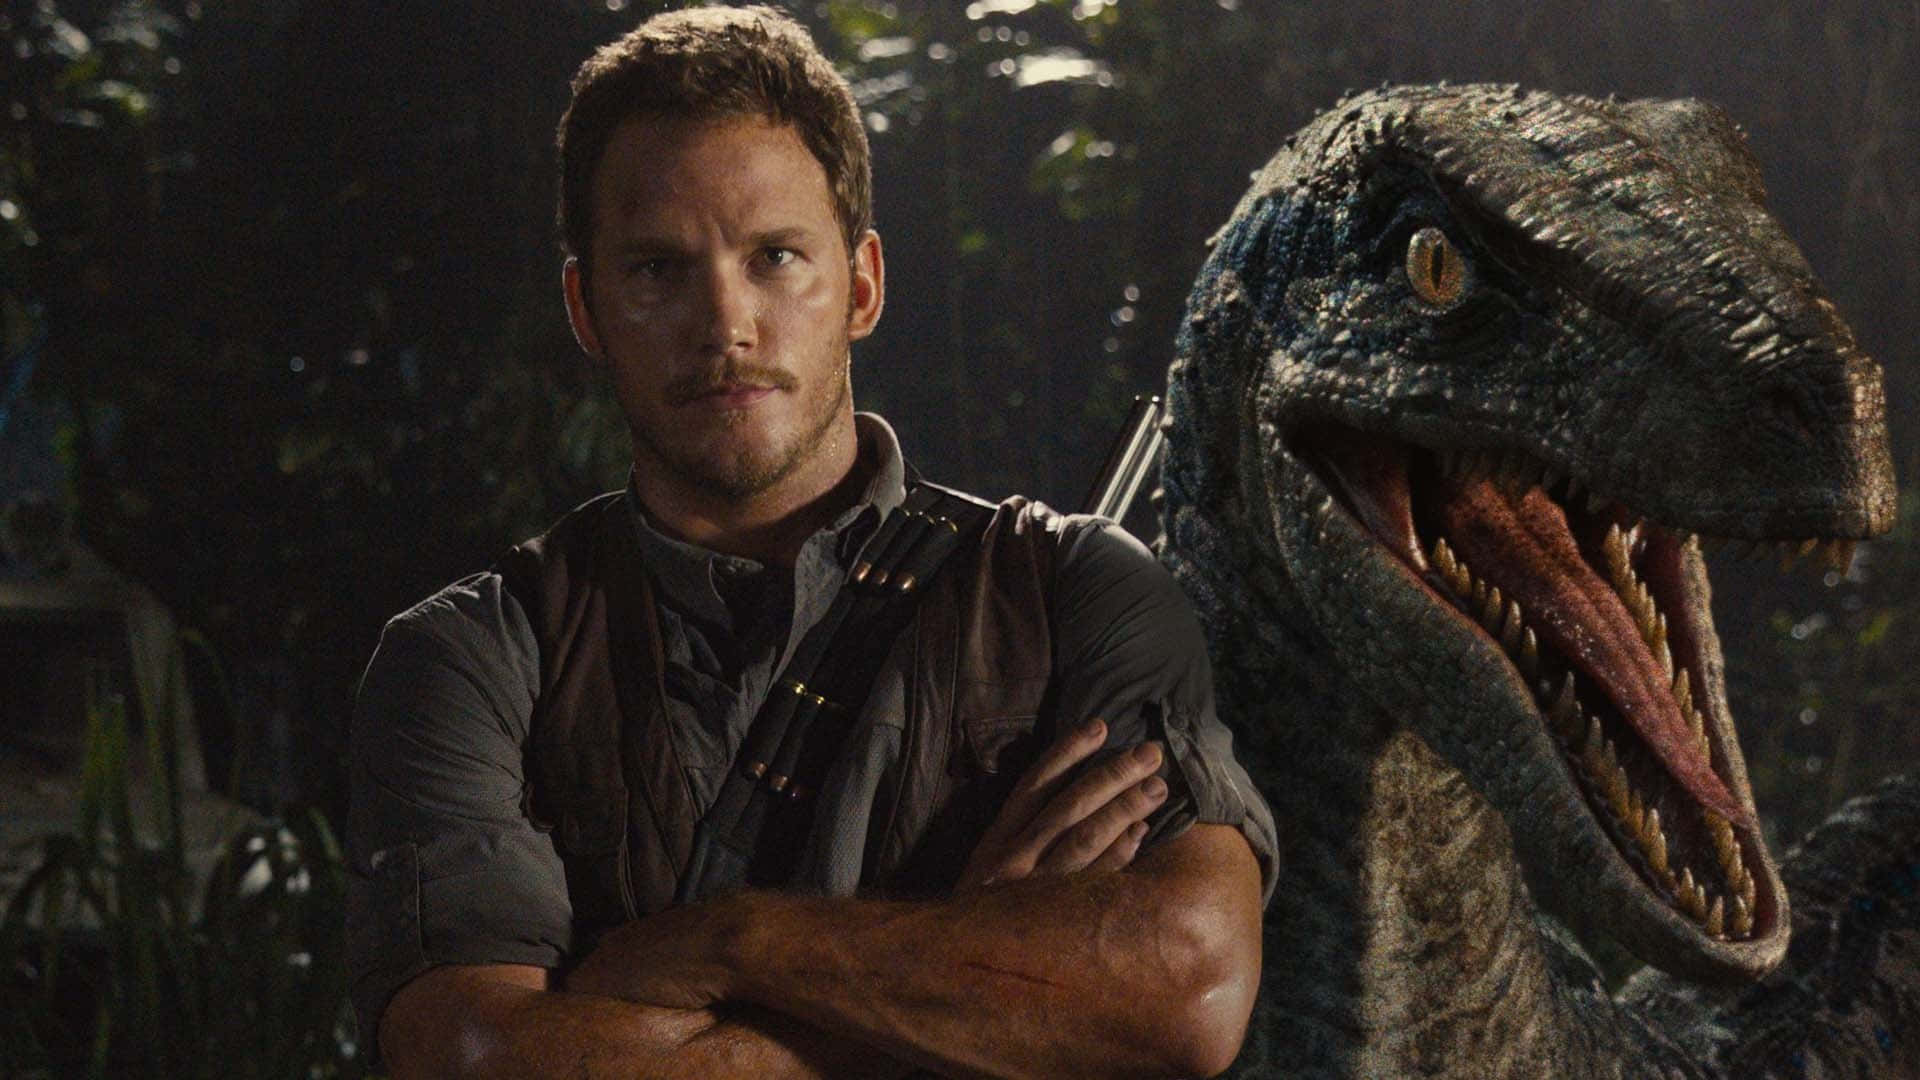 Join the adventure in Jurassic World!